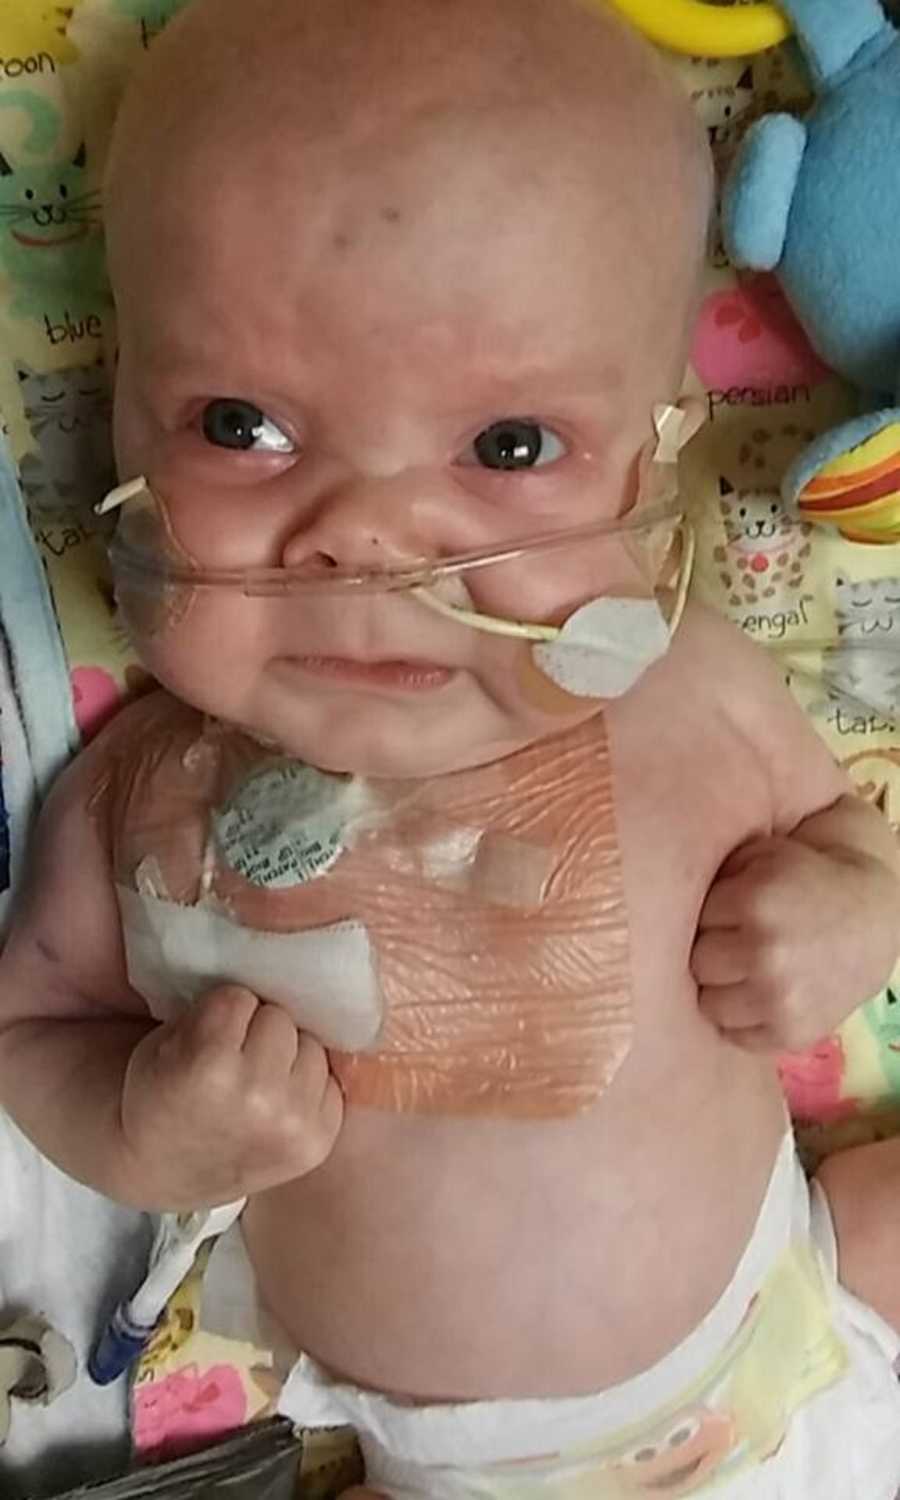 Newborn with brain cancer lays crying with tube up his nose